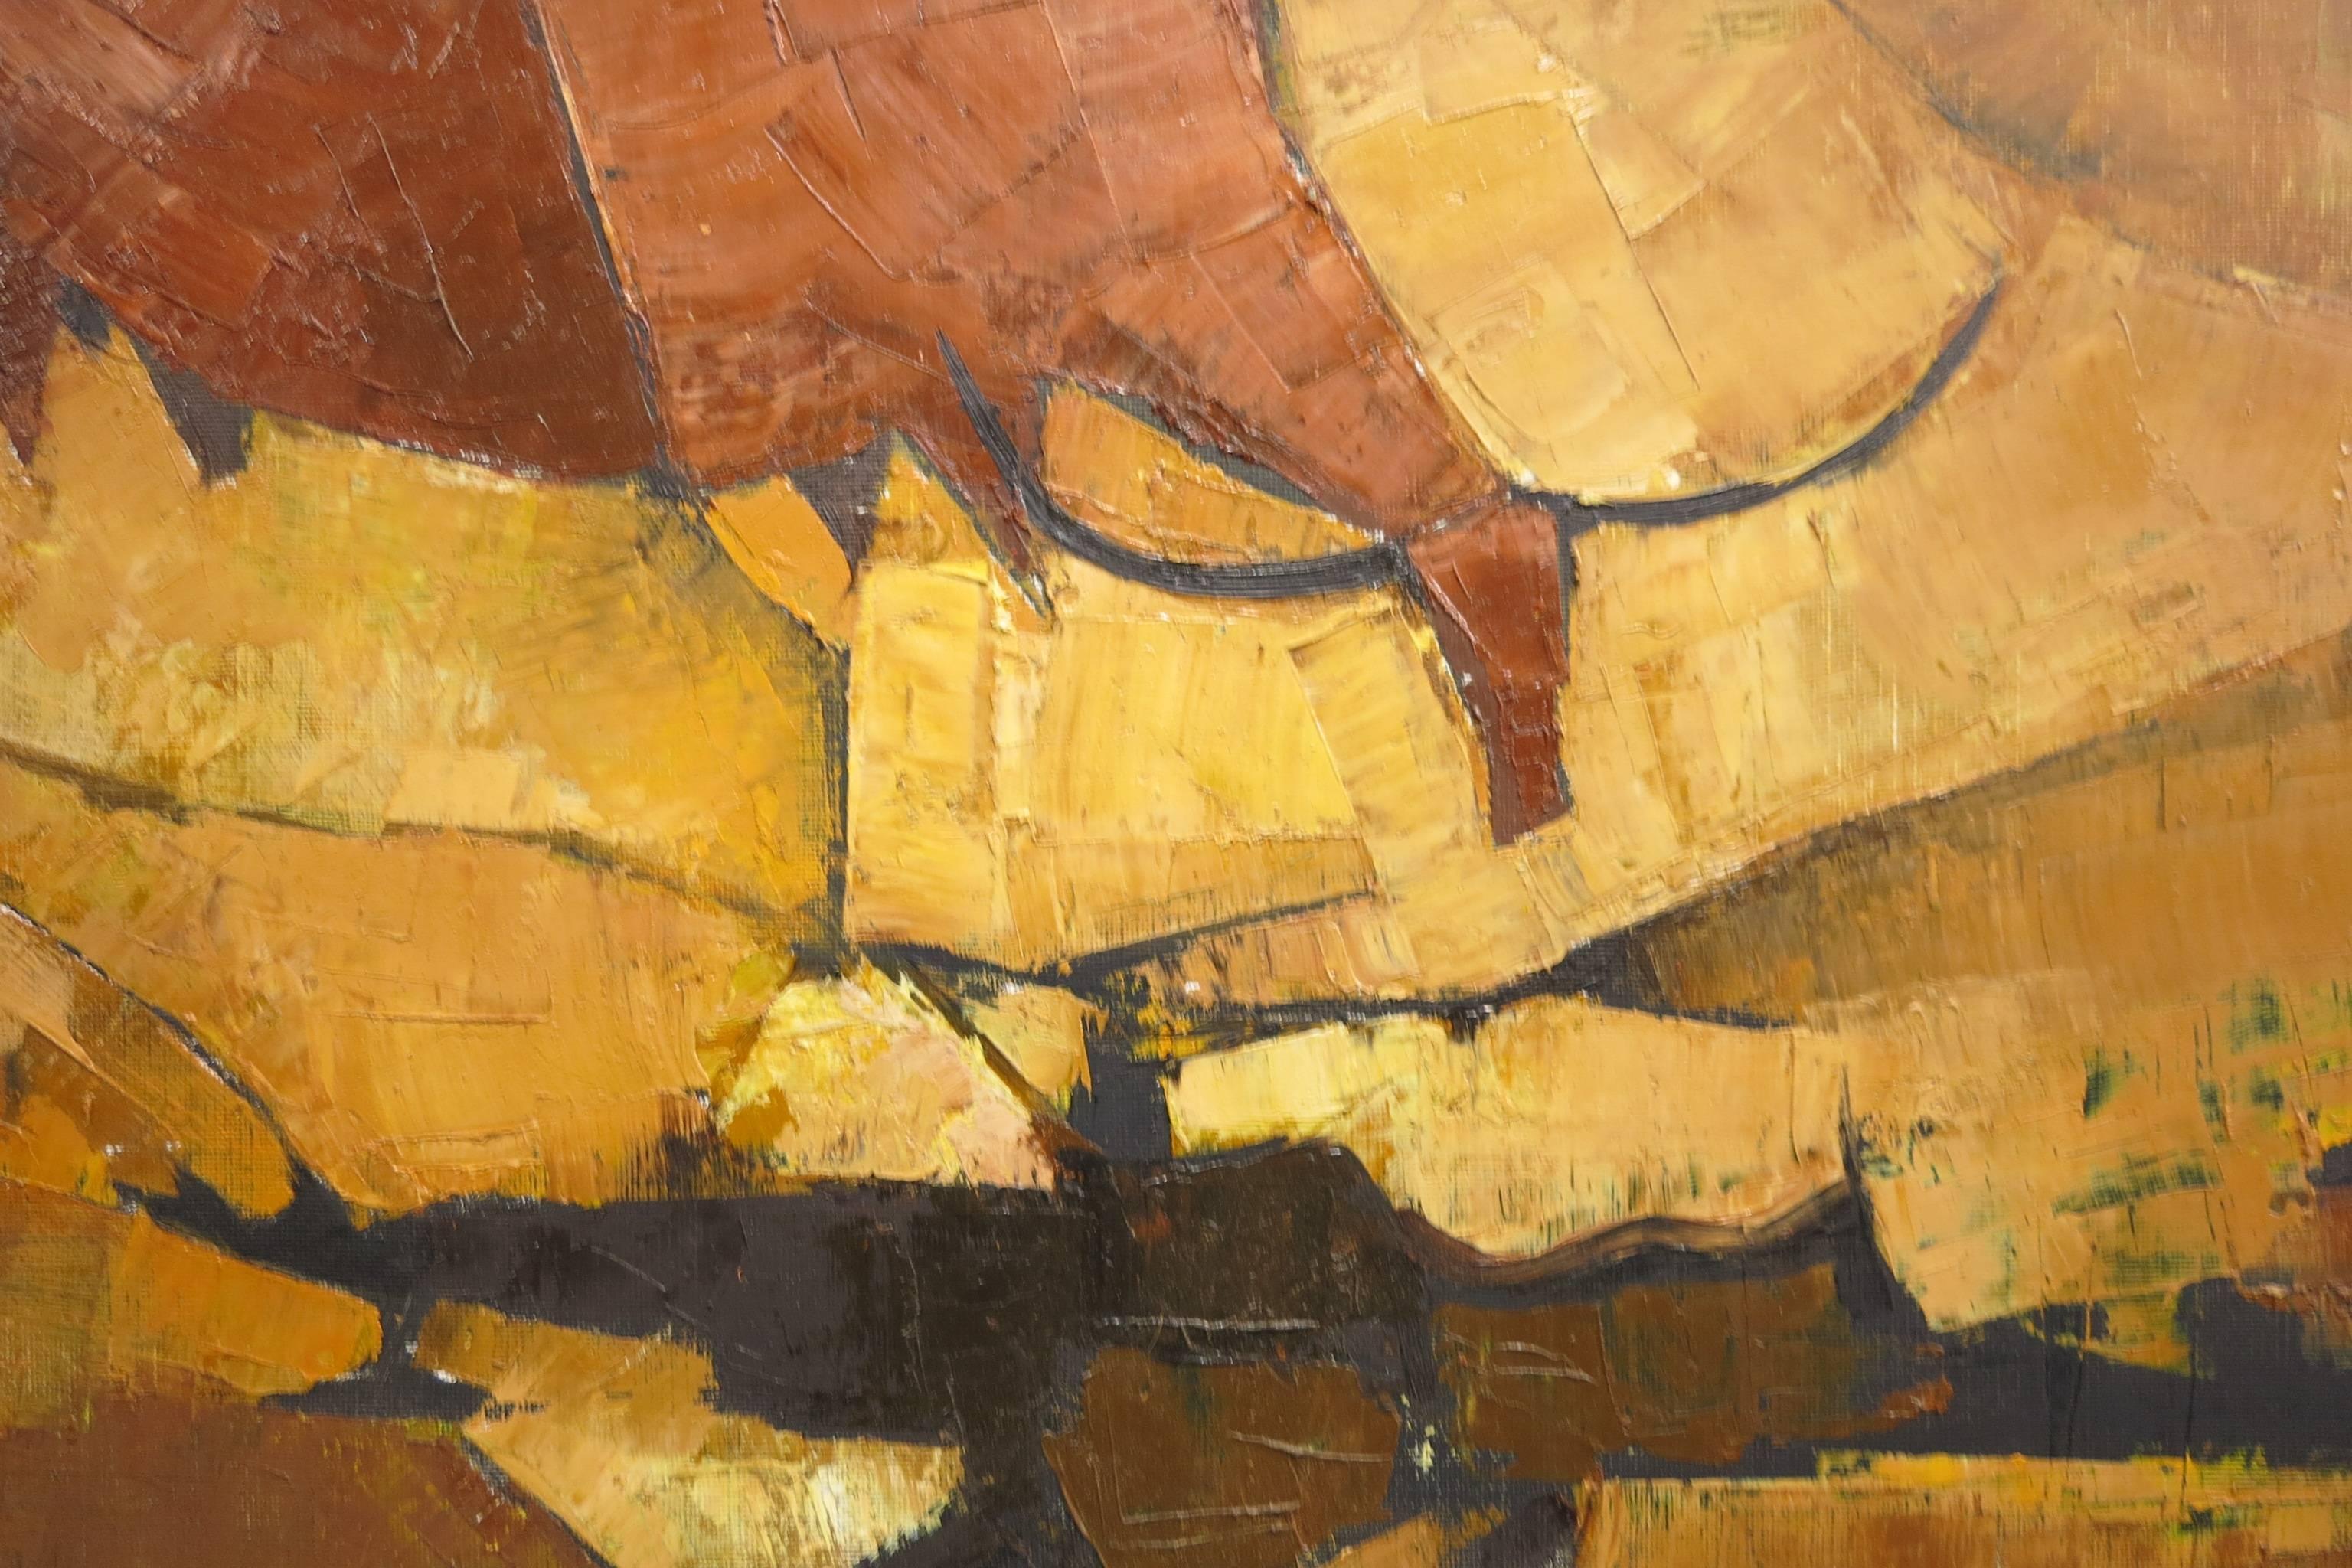 Cow #2 (abstract modernist cubist Asian Singaporean landscape painting) - Painting by Tay Bak Koi